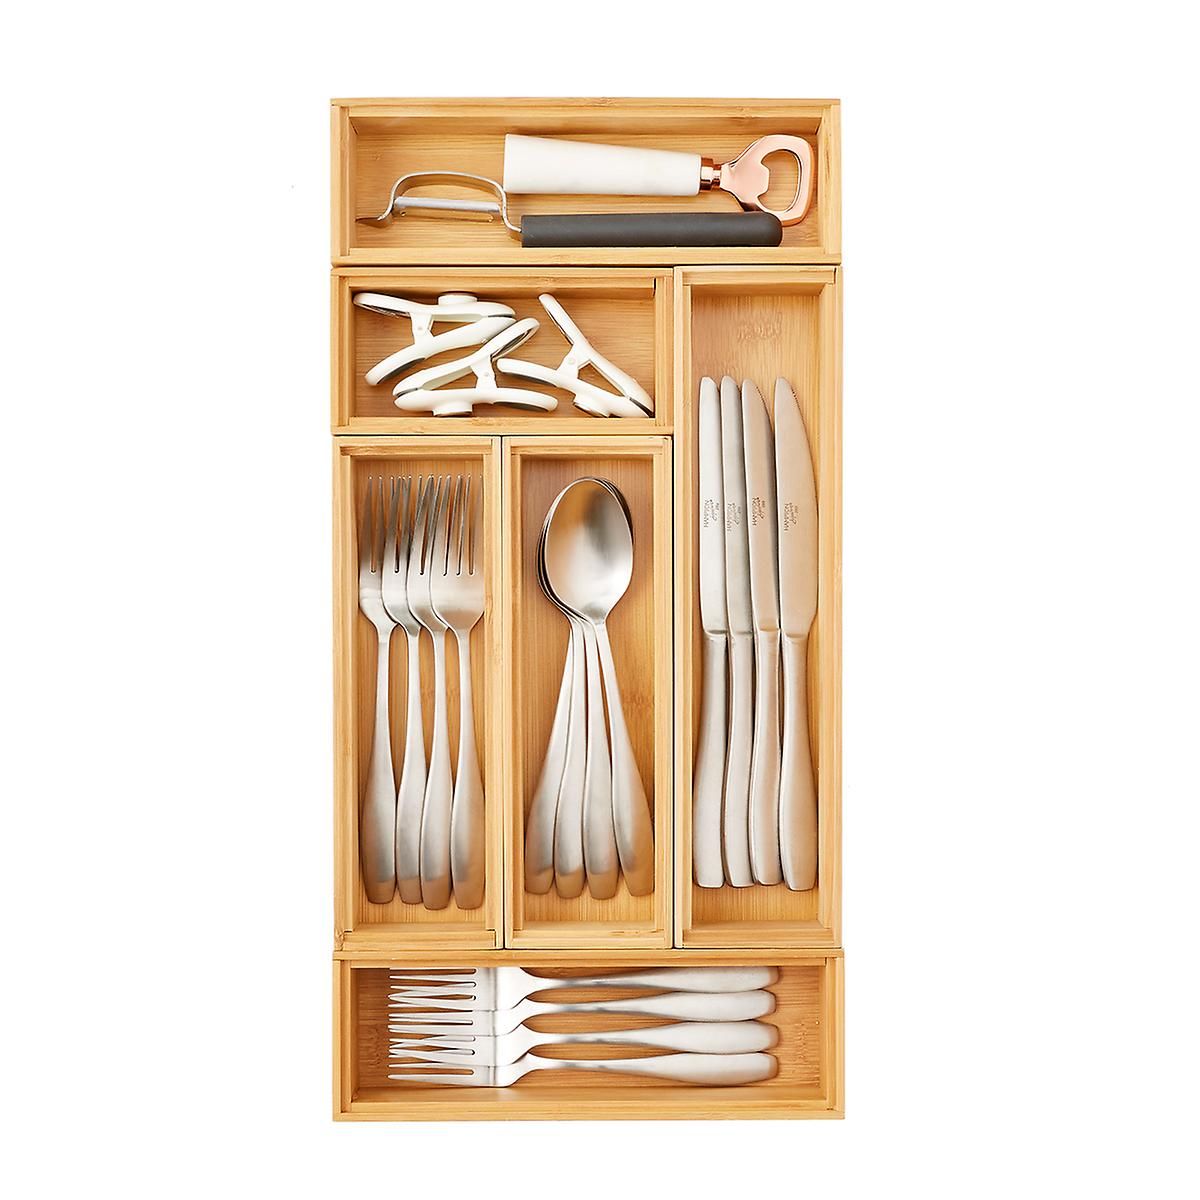 9" x 18" Bamboo Drawer Organizer Starter Kit | The Container Store